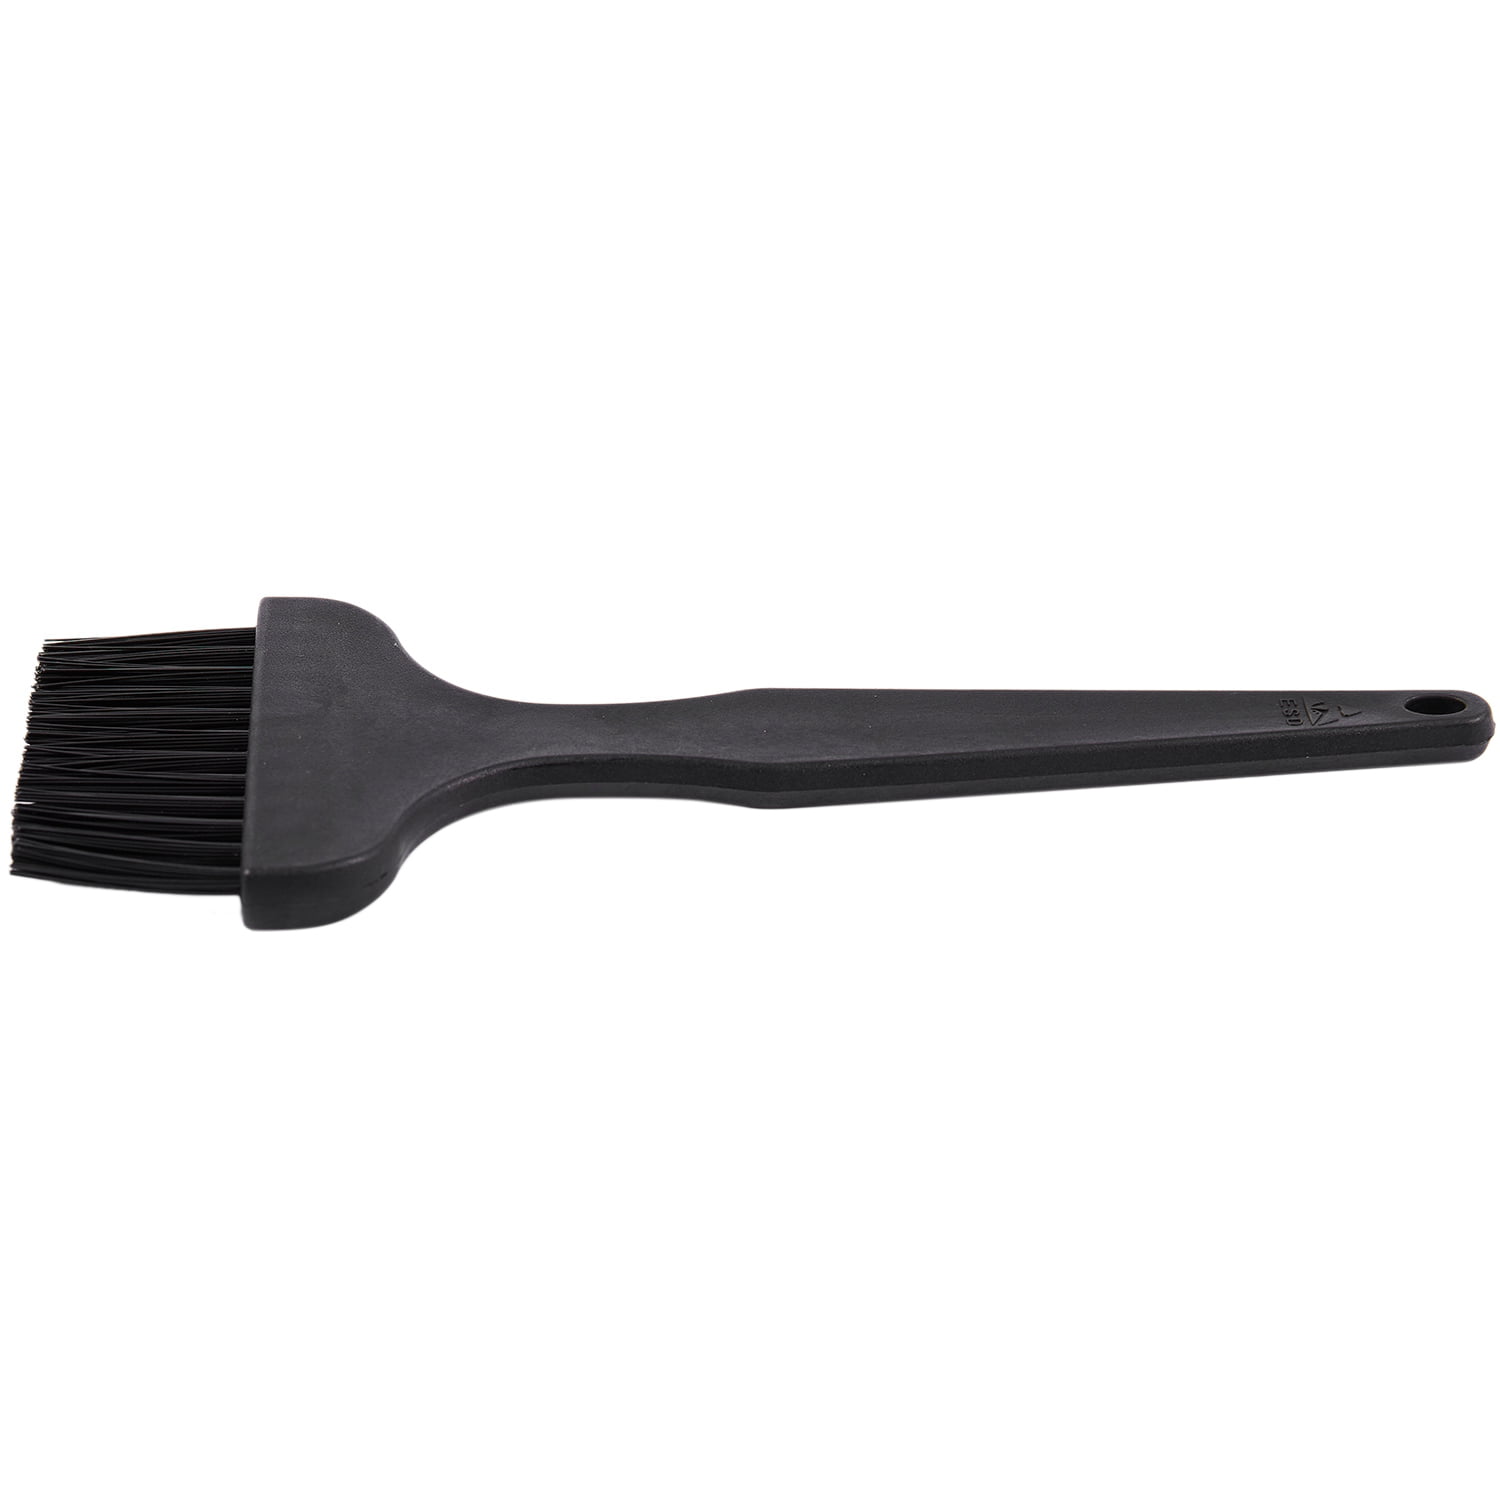 Anti Static ESD Cleaning Brush for PCB Motherboards Fans KeyboardsGA 